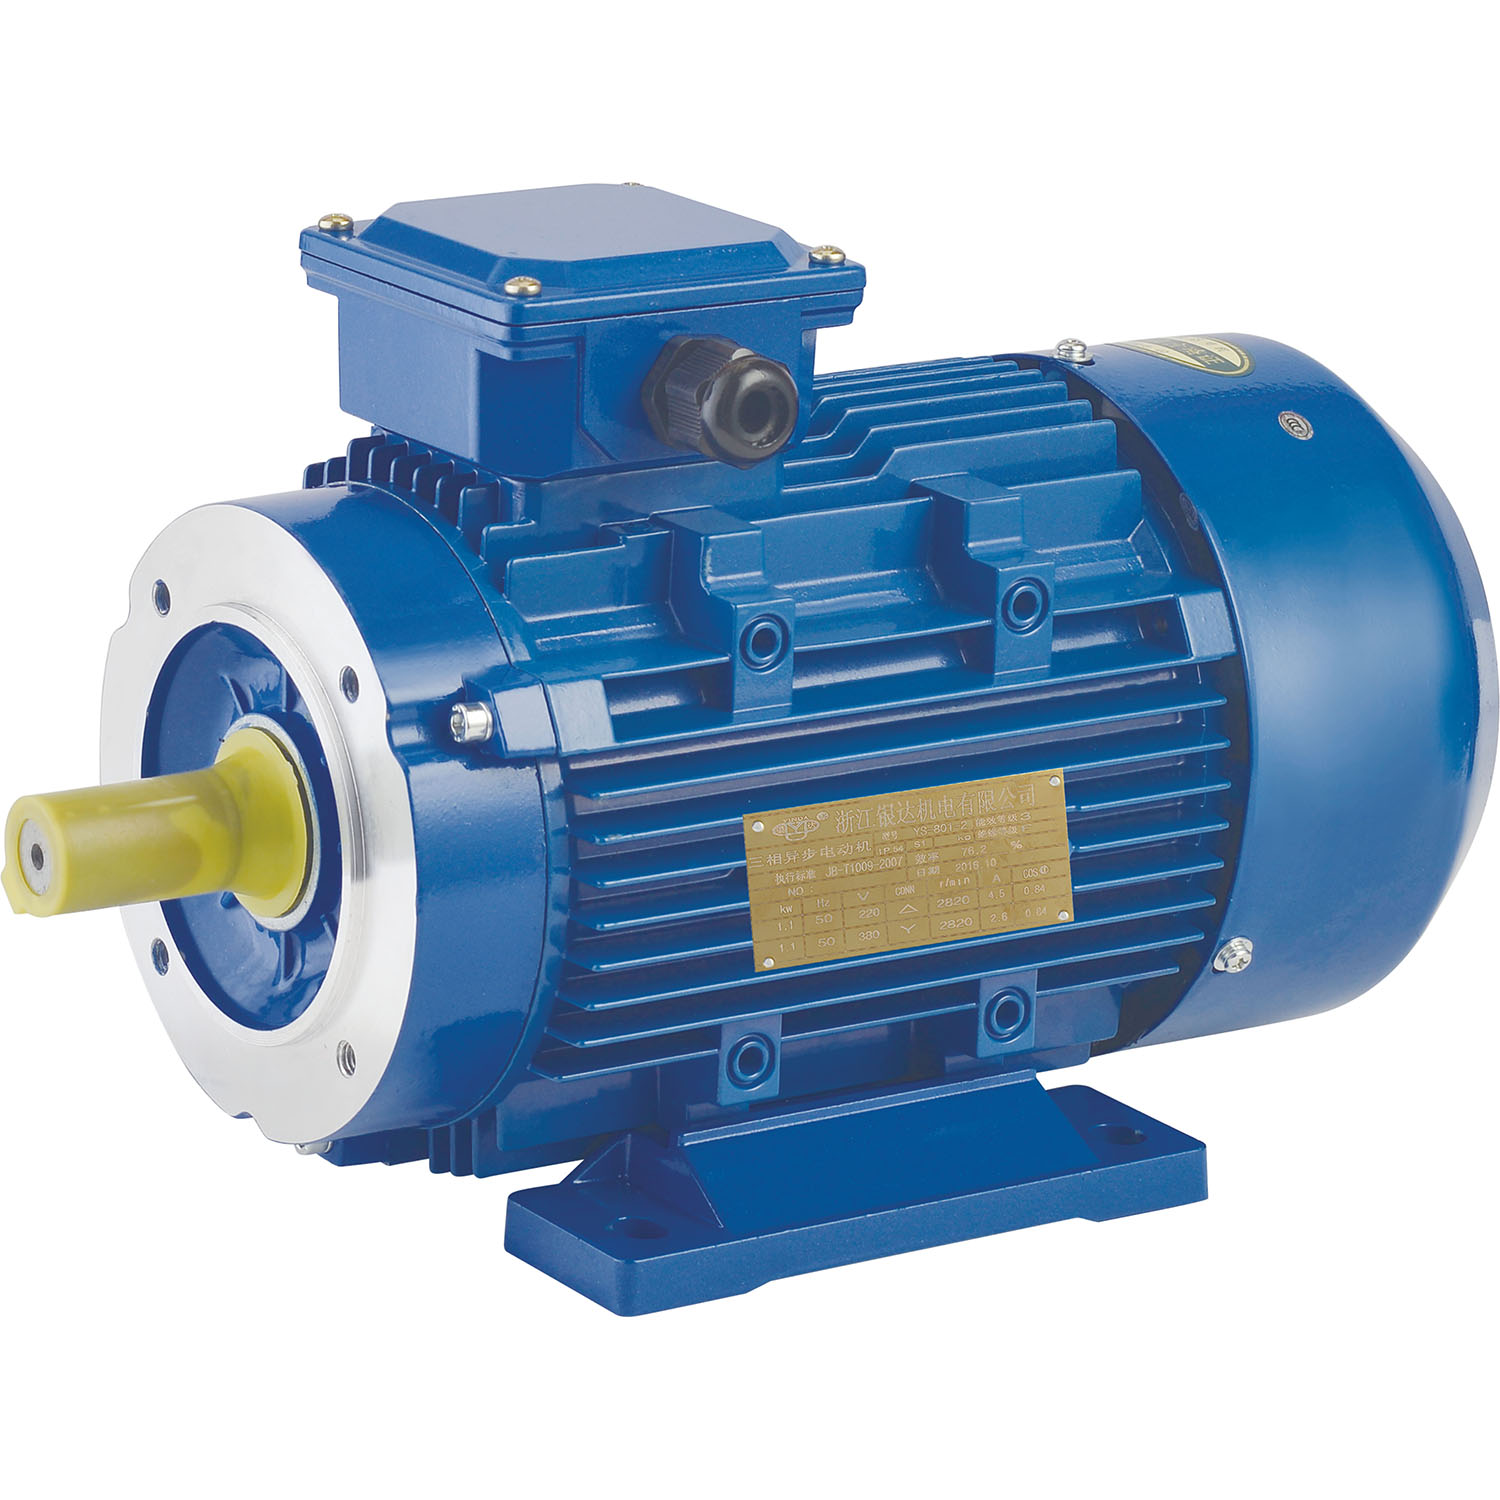 YX3-100L-6 1.5KW 2.0HP aluminum cylinder series high efficiency three-phase asynchronous motor